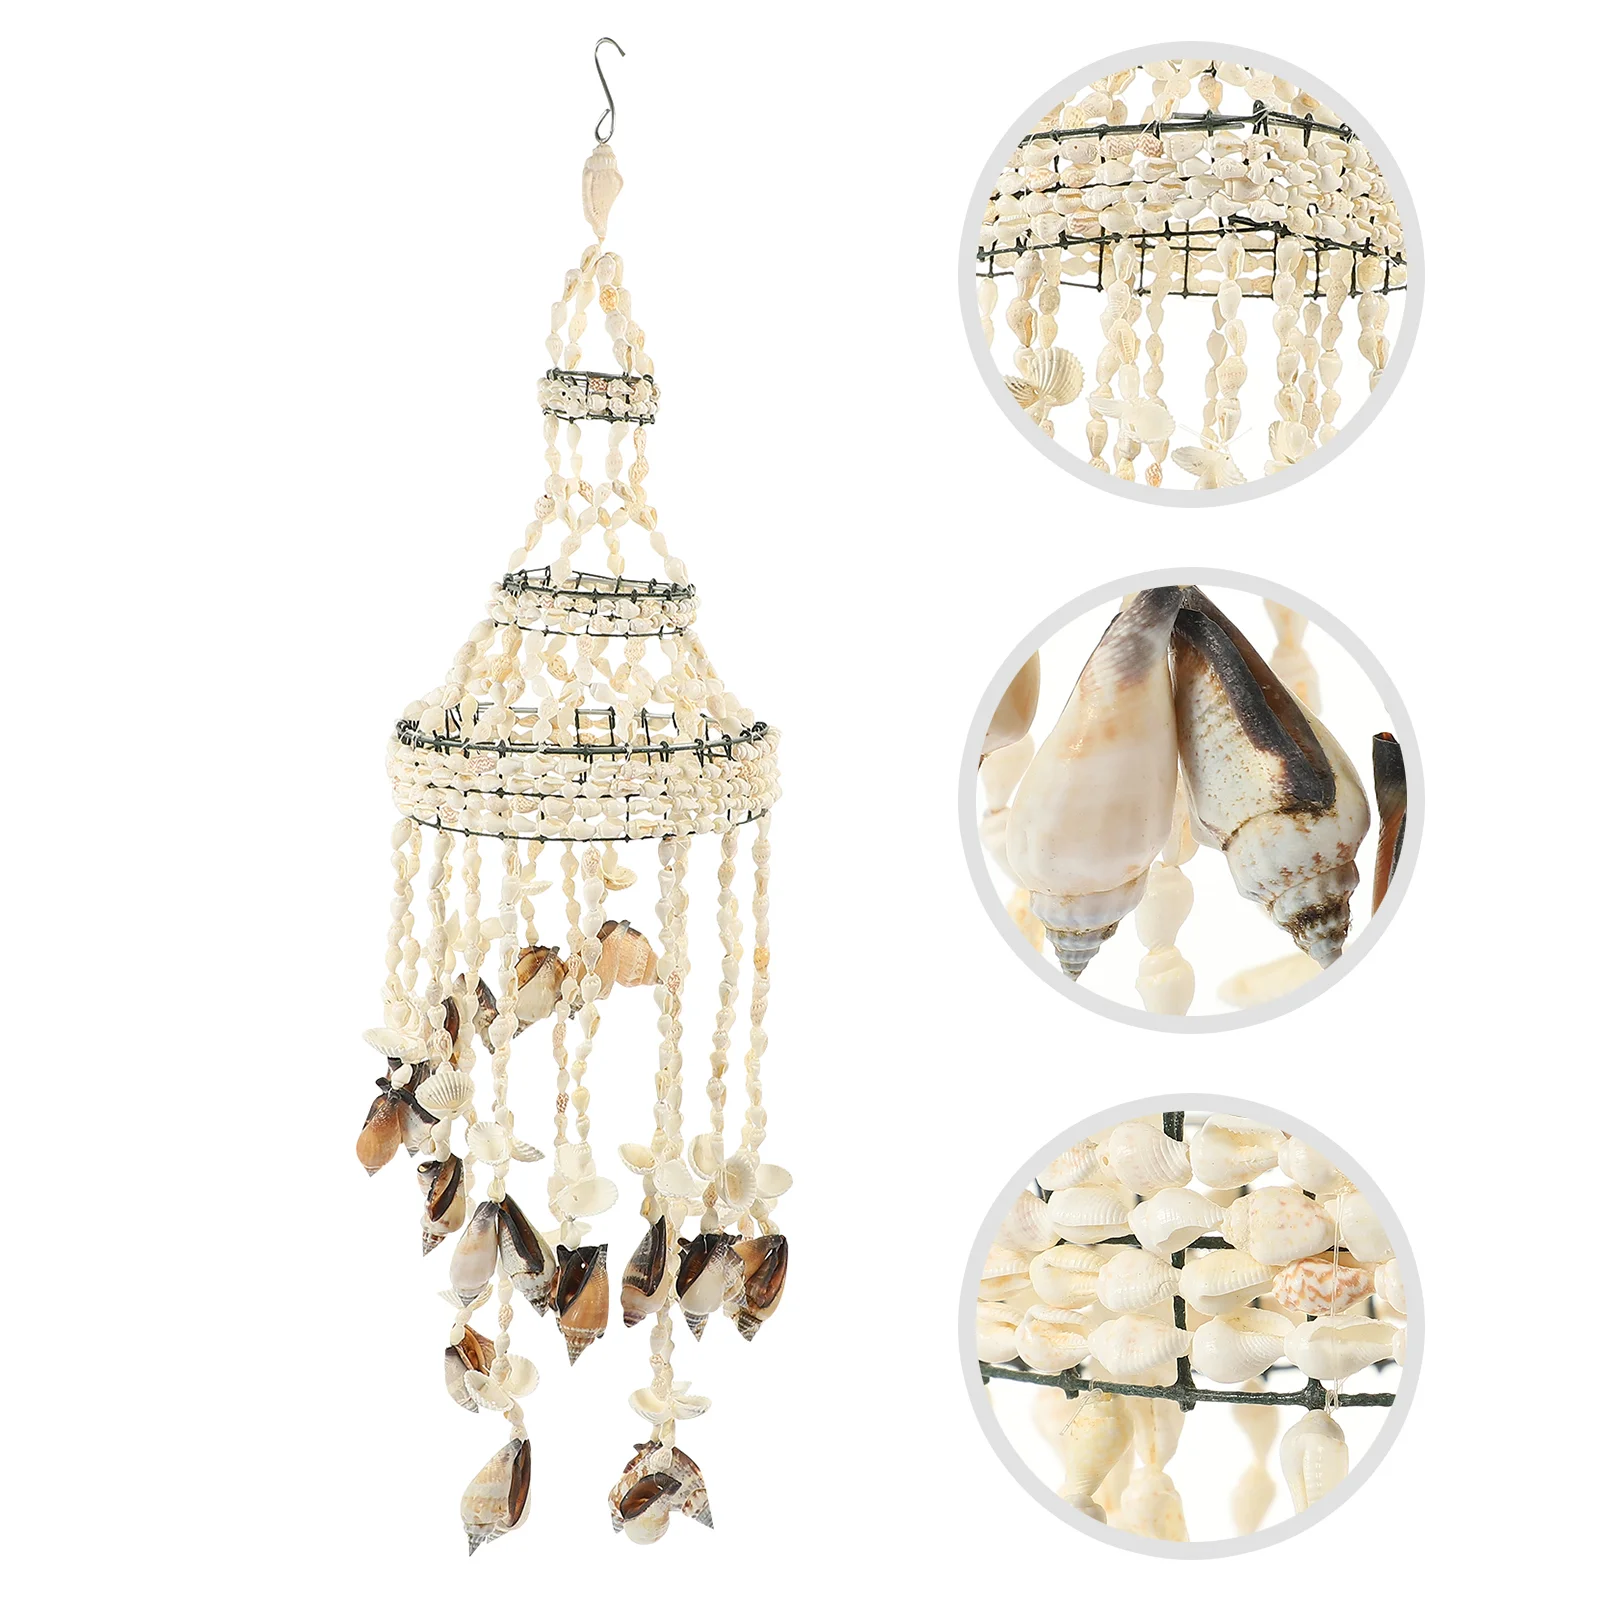 

House Decorations Home Hanging Wind Chime Musical Chimes Bell Birthday Present Shell